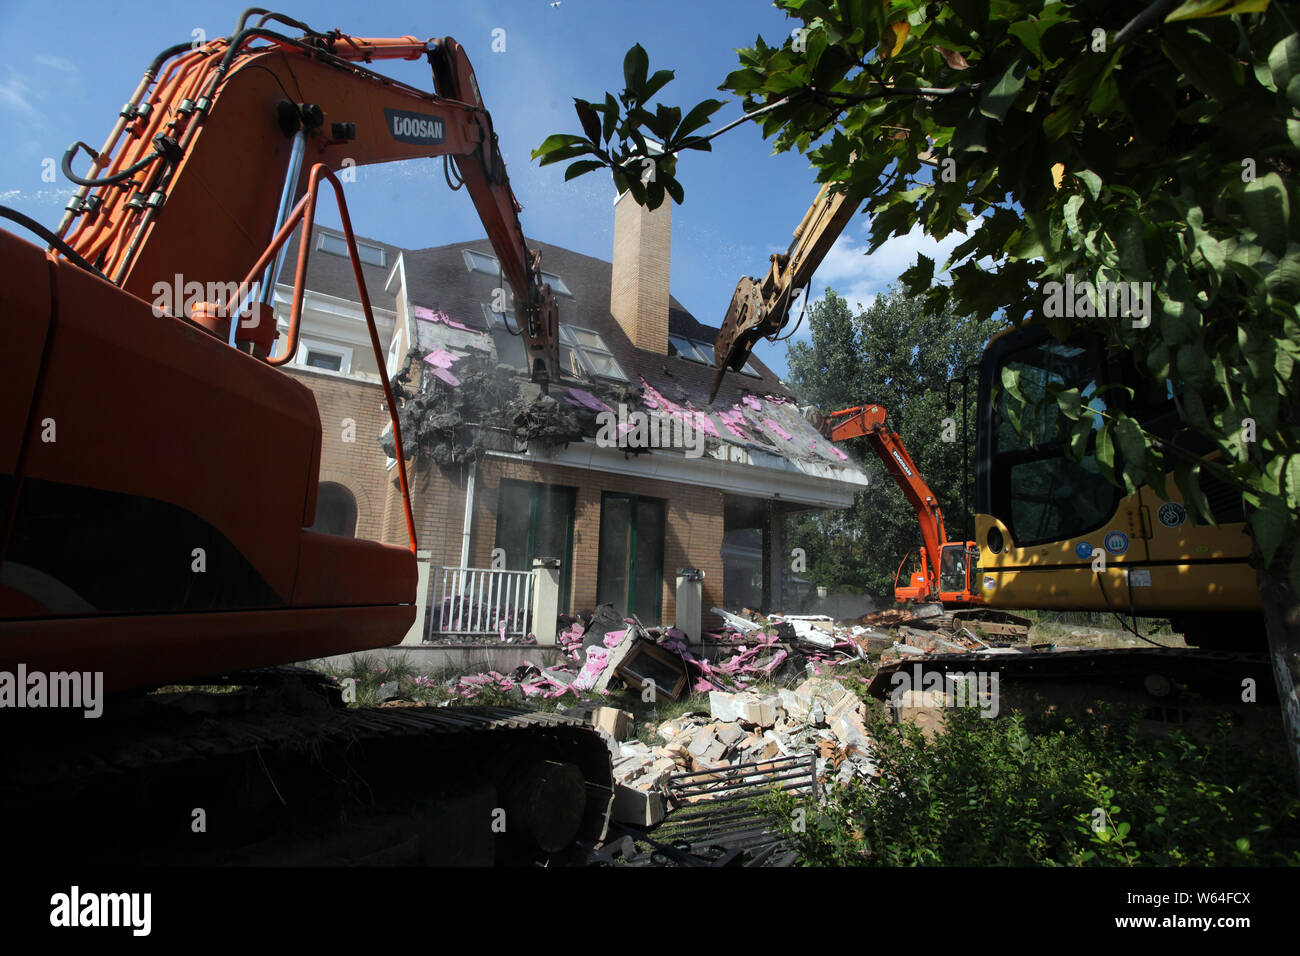 Chinese Workers Operate Excavators To Demolish Illegally Built Villas In Xian City Northwest